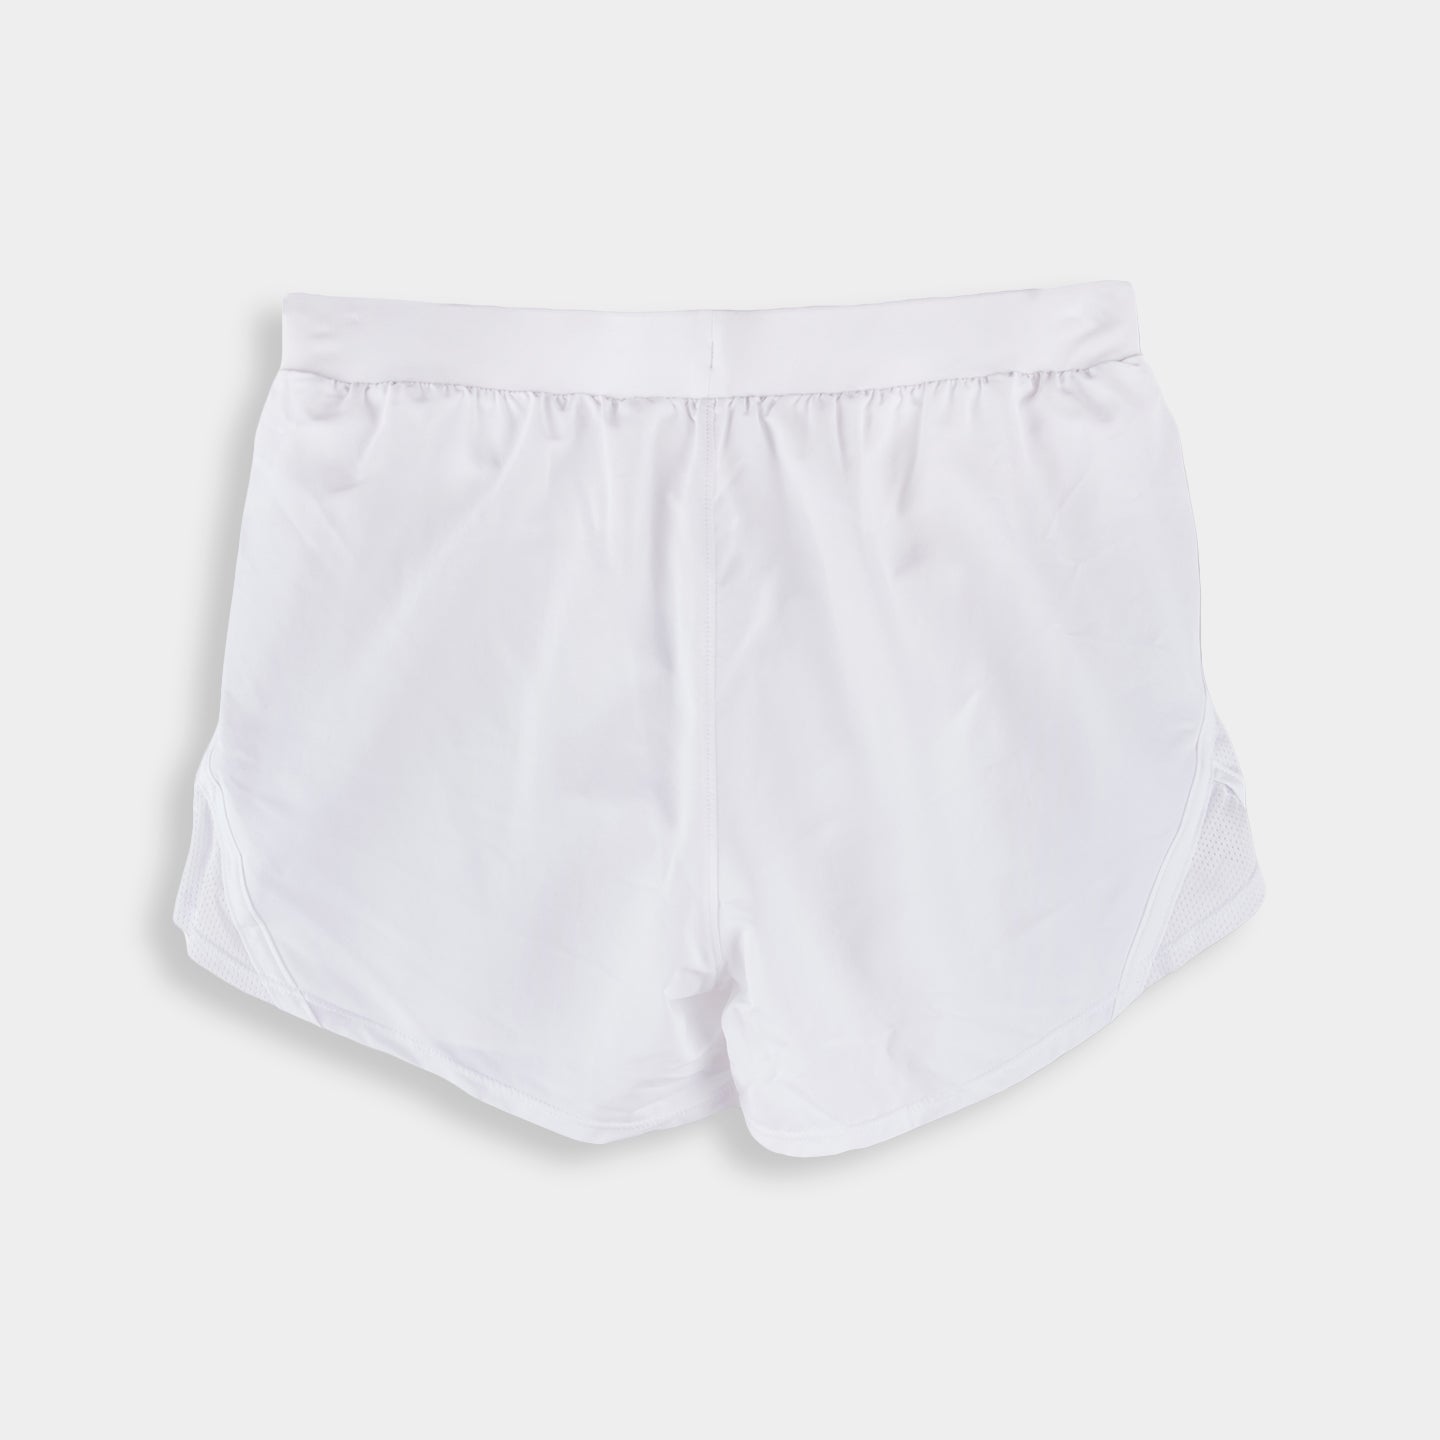 Under Armour UA Fly By 2.0 2N1 Short, White, XL A2